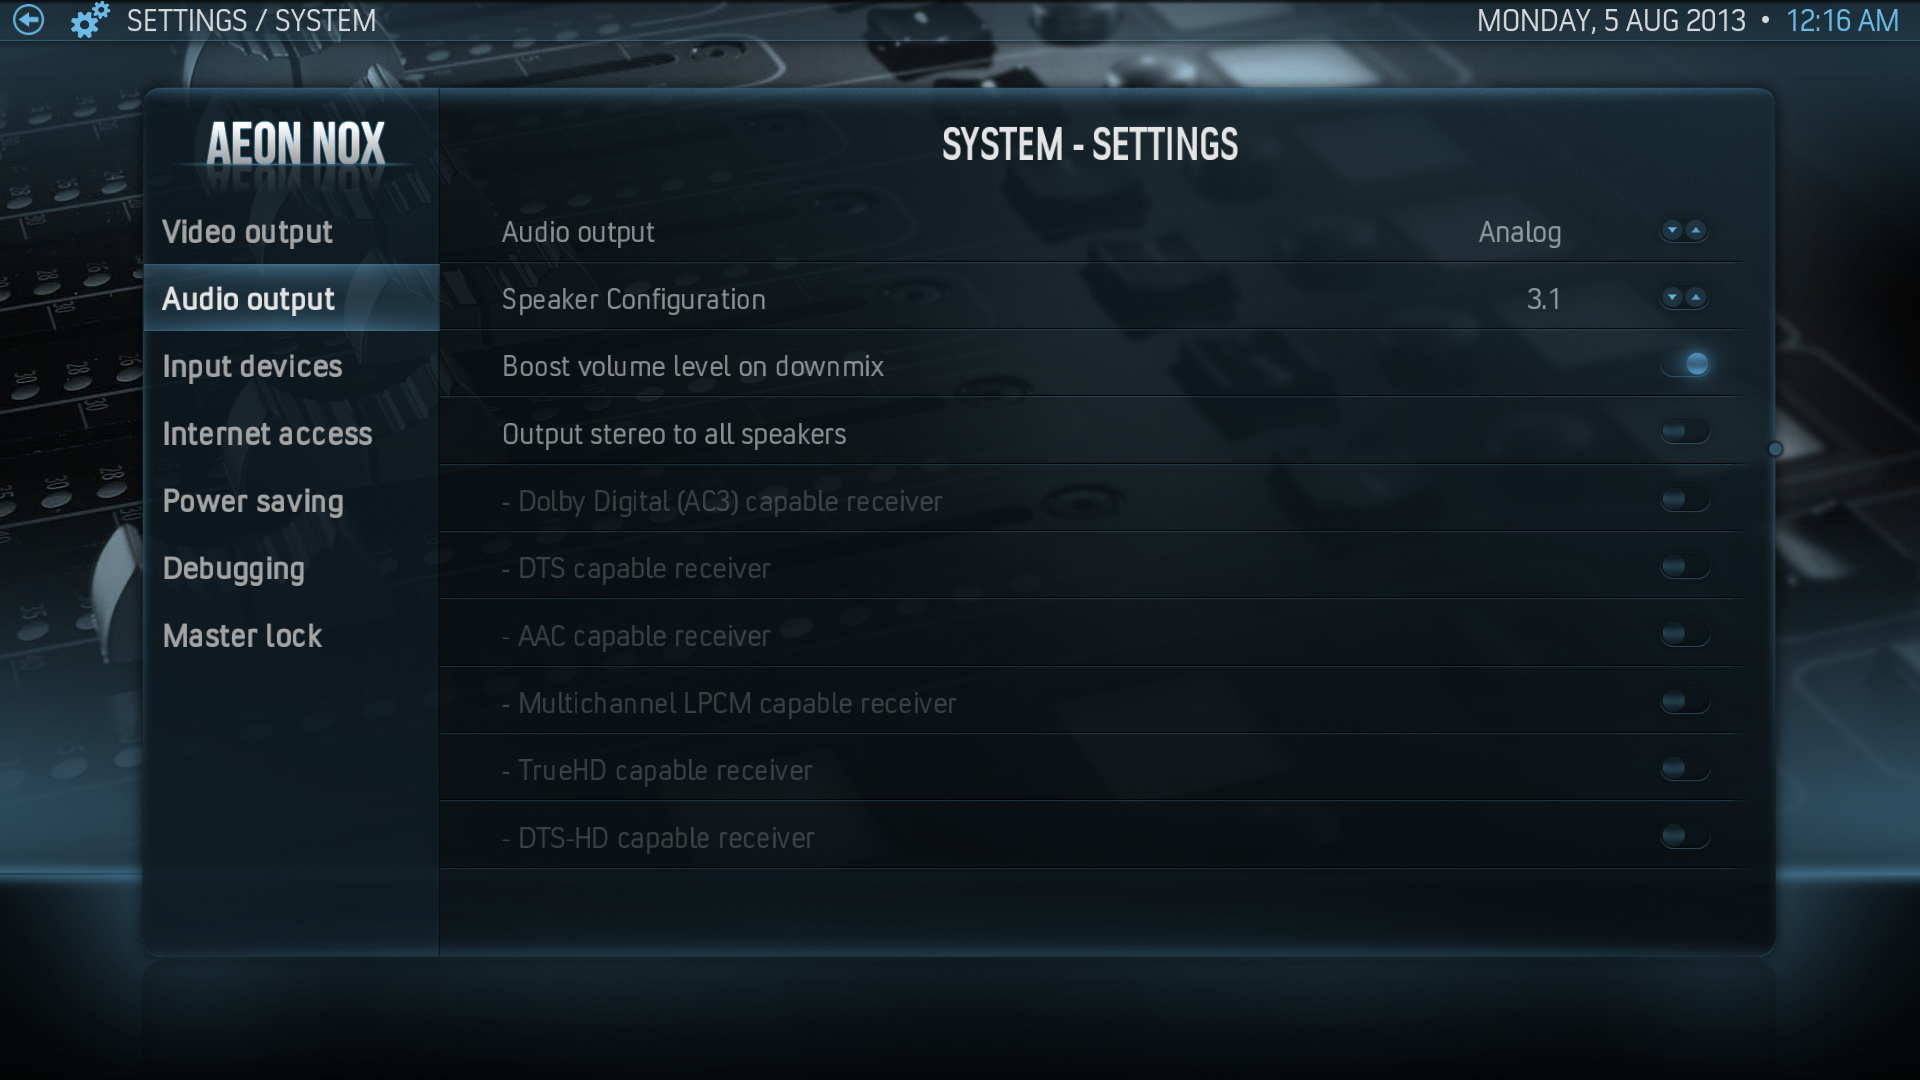 System Settings -> Audio Output (W/HDMI to TV, no receiver)